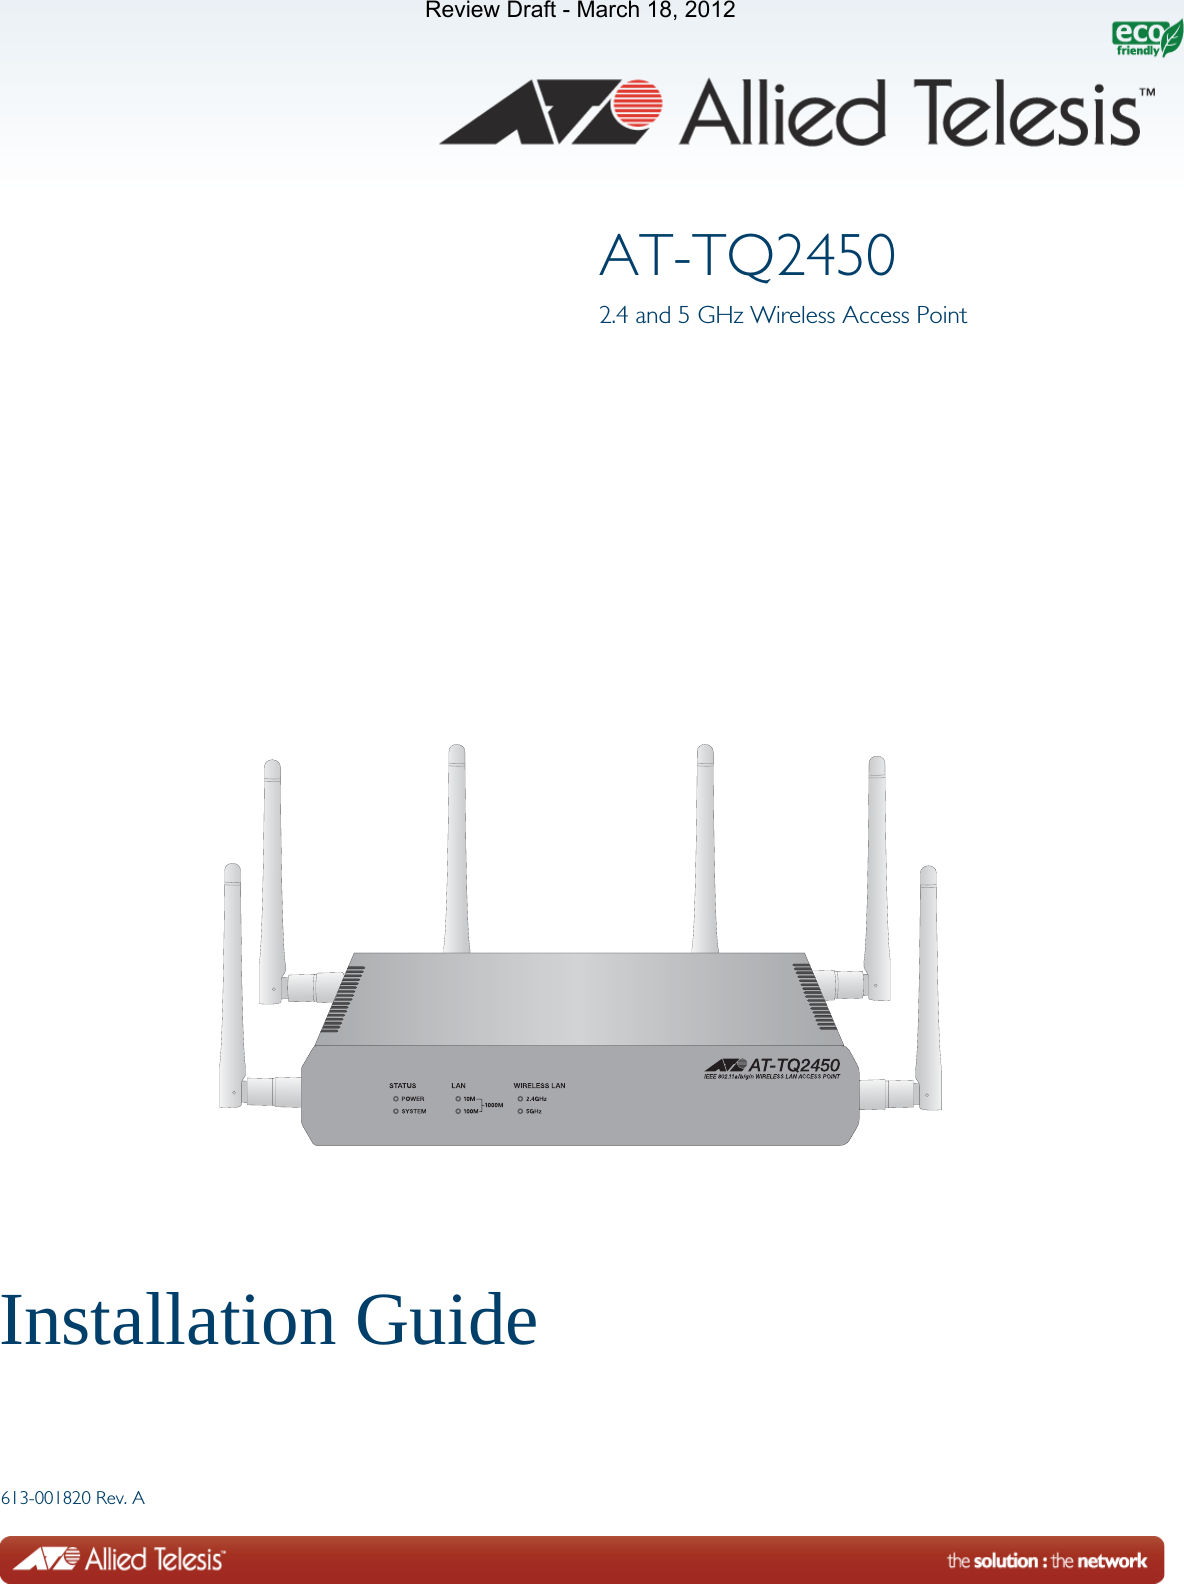 613-001820 Rev. AAT-TQ24502.4 and 5 GHz Wireless Access PointInstallation GuideReview Draft - March 18, 2012